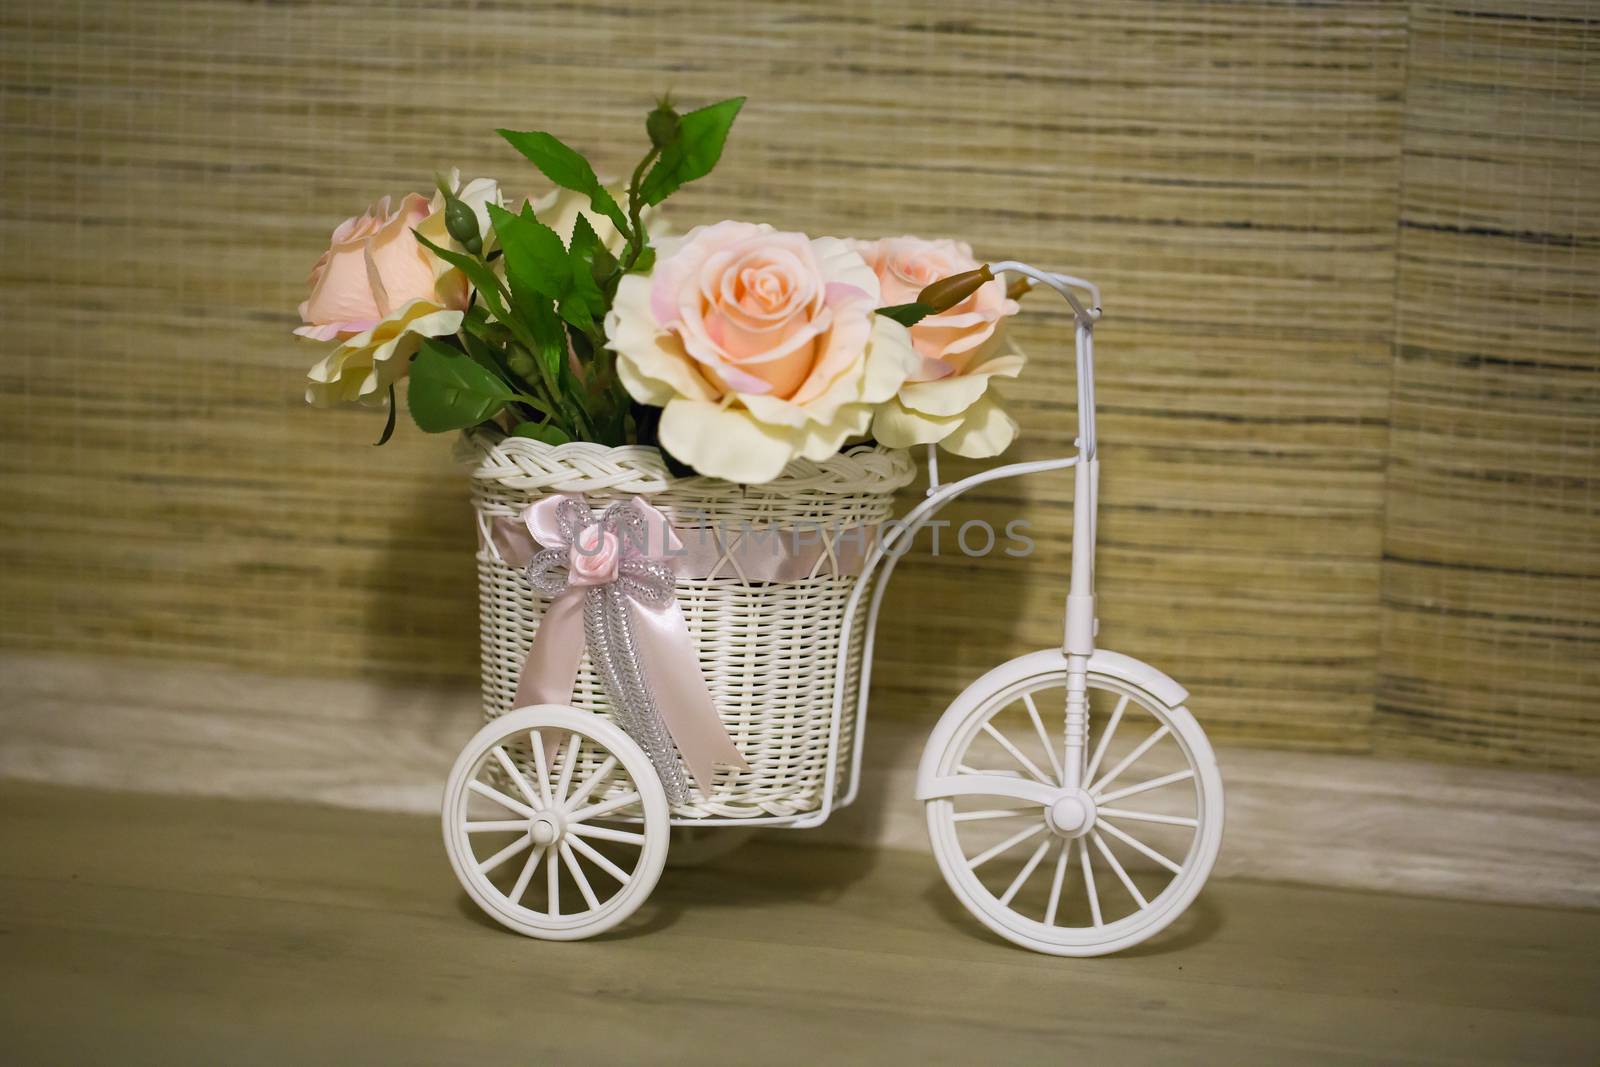 Roses on a mini tricycle. by boys1983@mail.ru